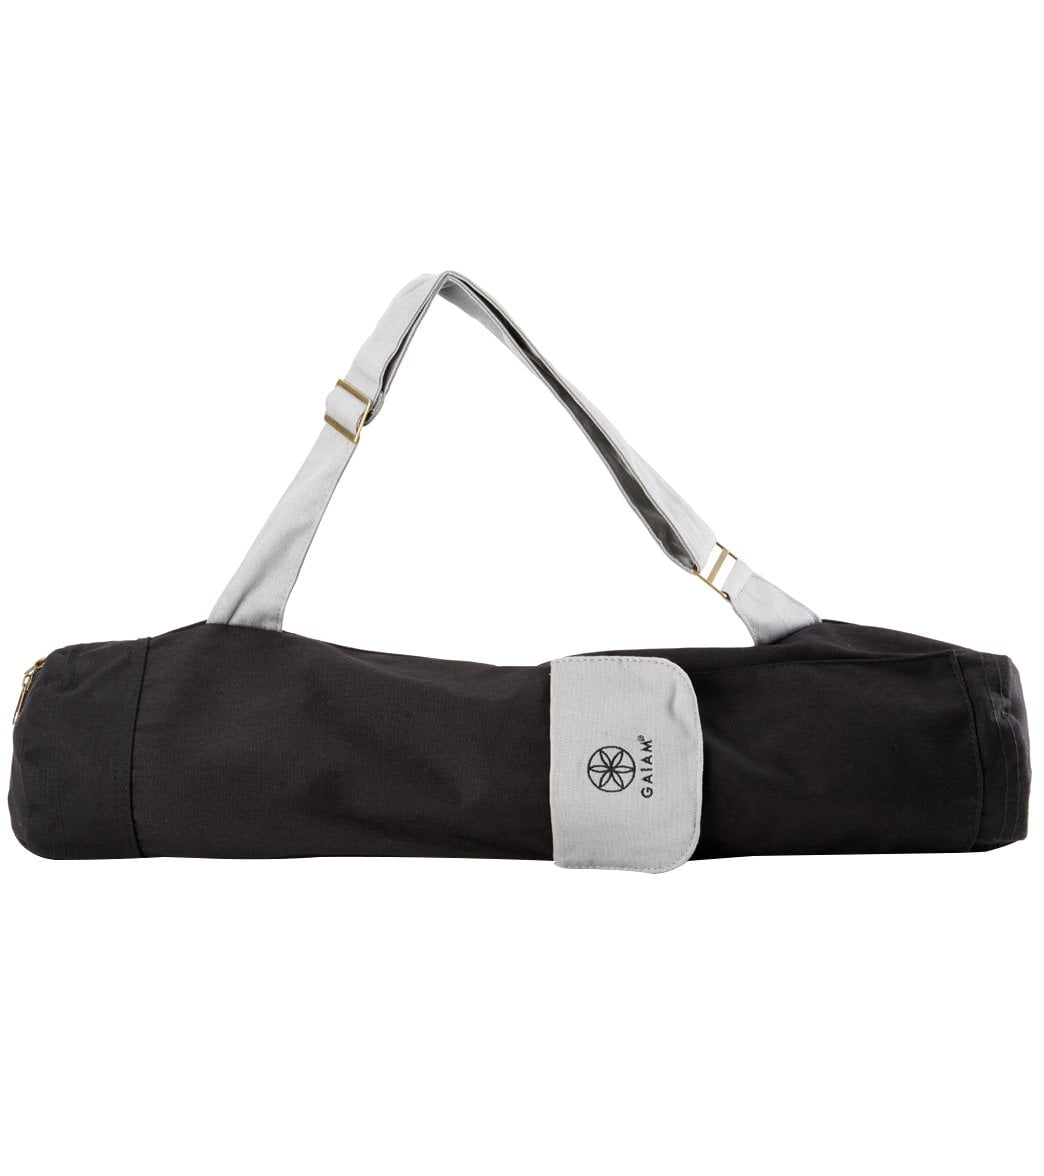 8 Best Yoga Mat Bags to Buy in 2022 - Top Rated and Reviewed